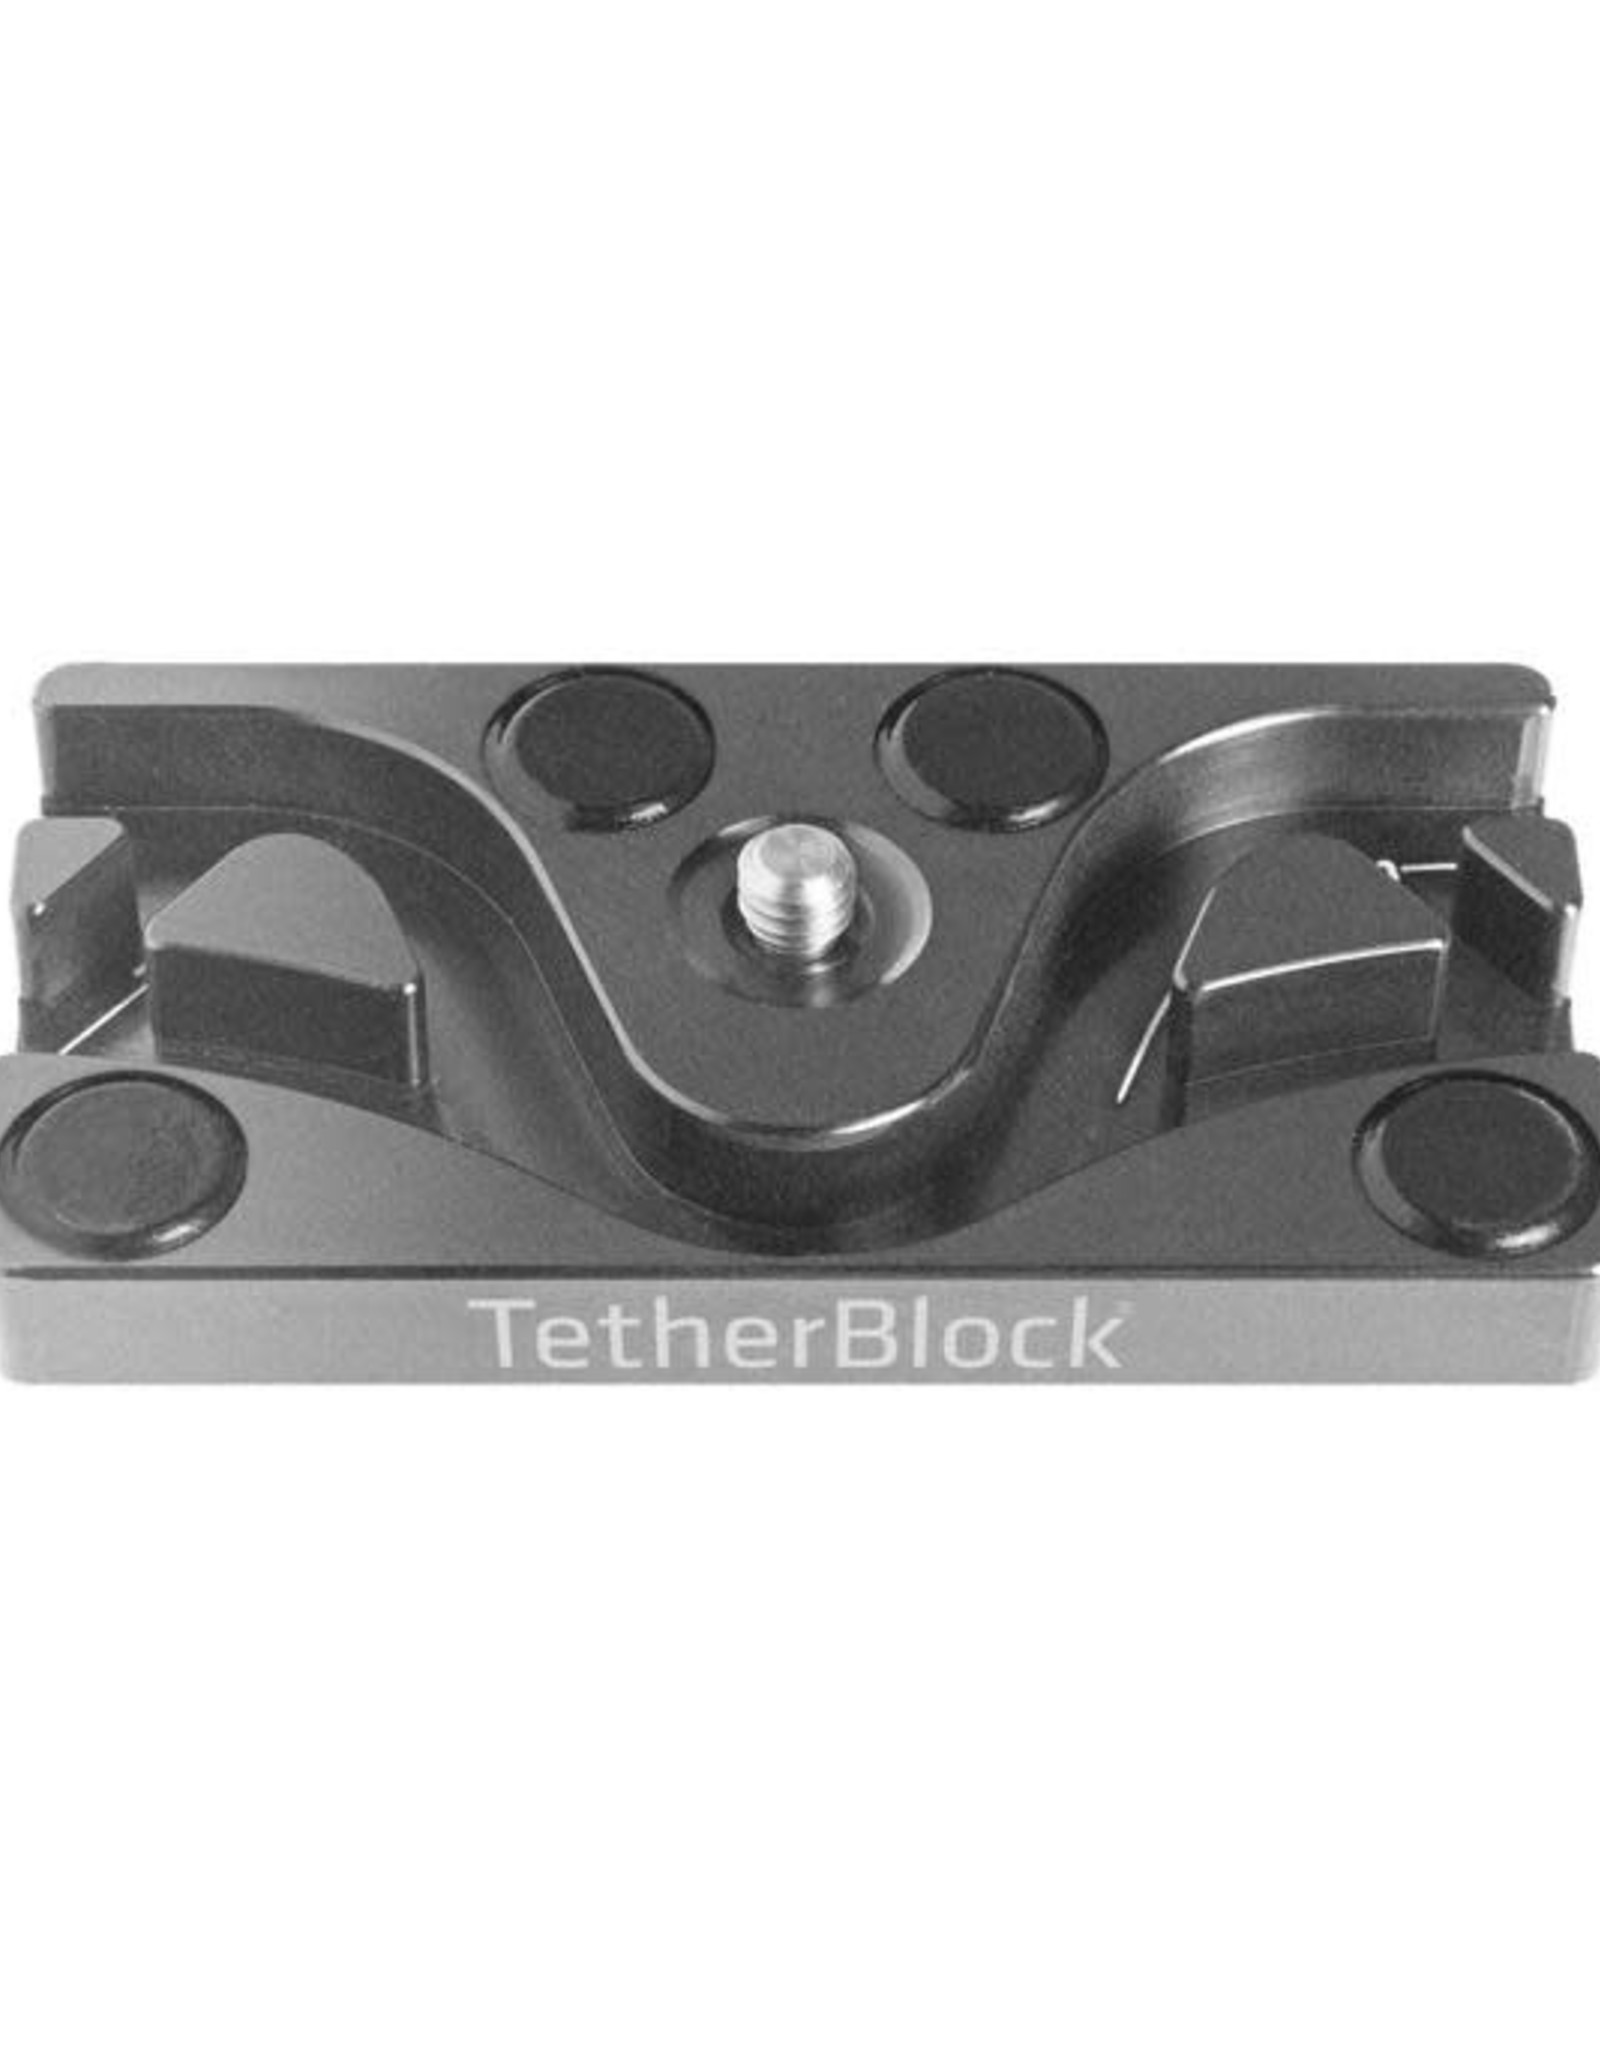 Tether Tools Tether Tools TetherBlock, Graphite